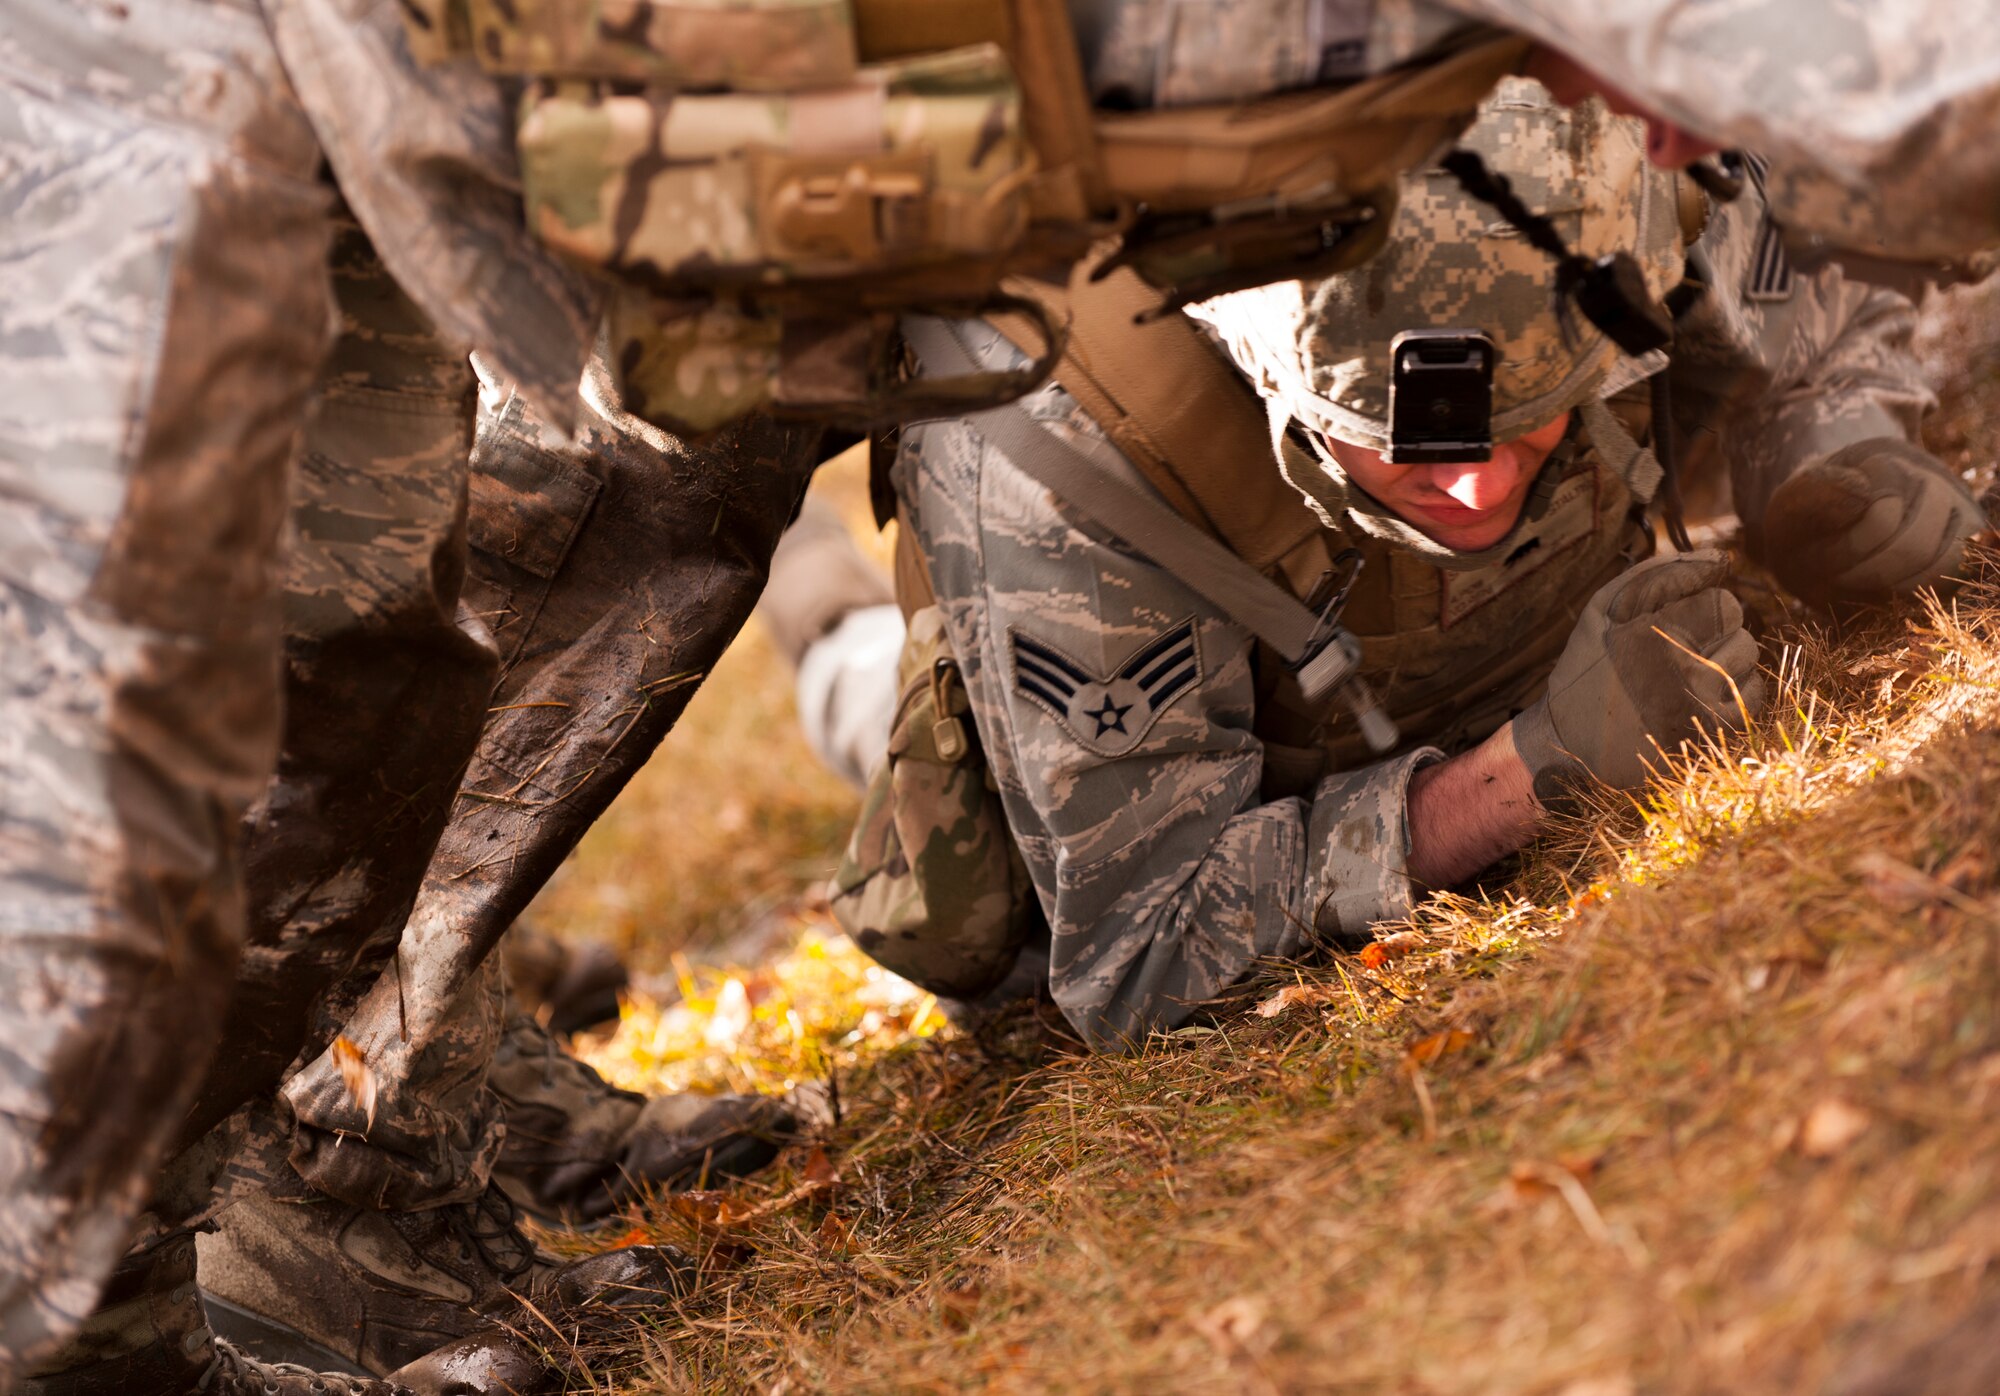 Senior Airman Dwight Stalter, 91st Missile Security Forces Squadron defender, crawls under his flight members during the Top Dog competition at Minot Air Force Base, N.D., March 12, 2014. The friendly competition allows defenders to practice training techniques while boosting morale. (U.S. Air Force photo/Airman 1st Class Apryl Hall)